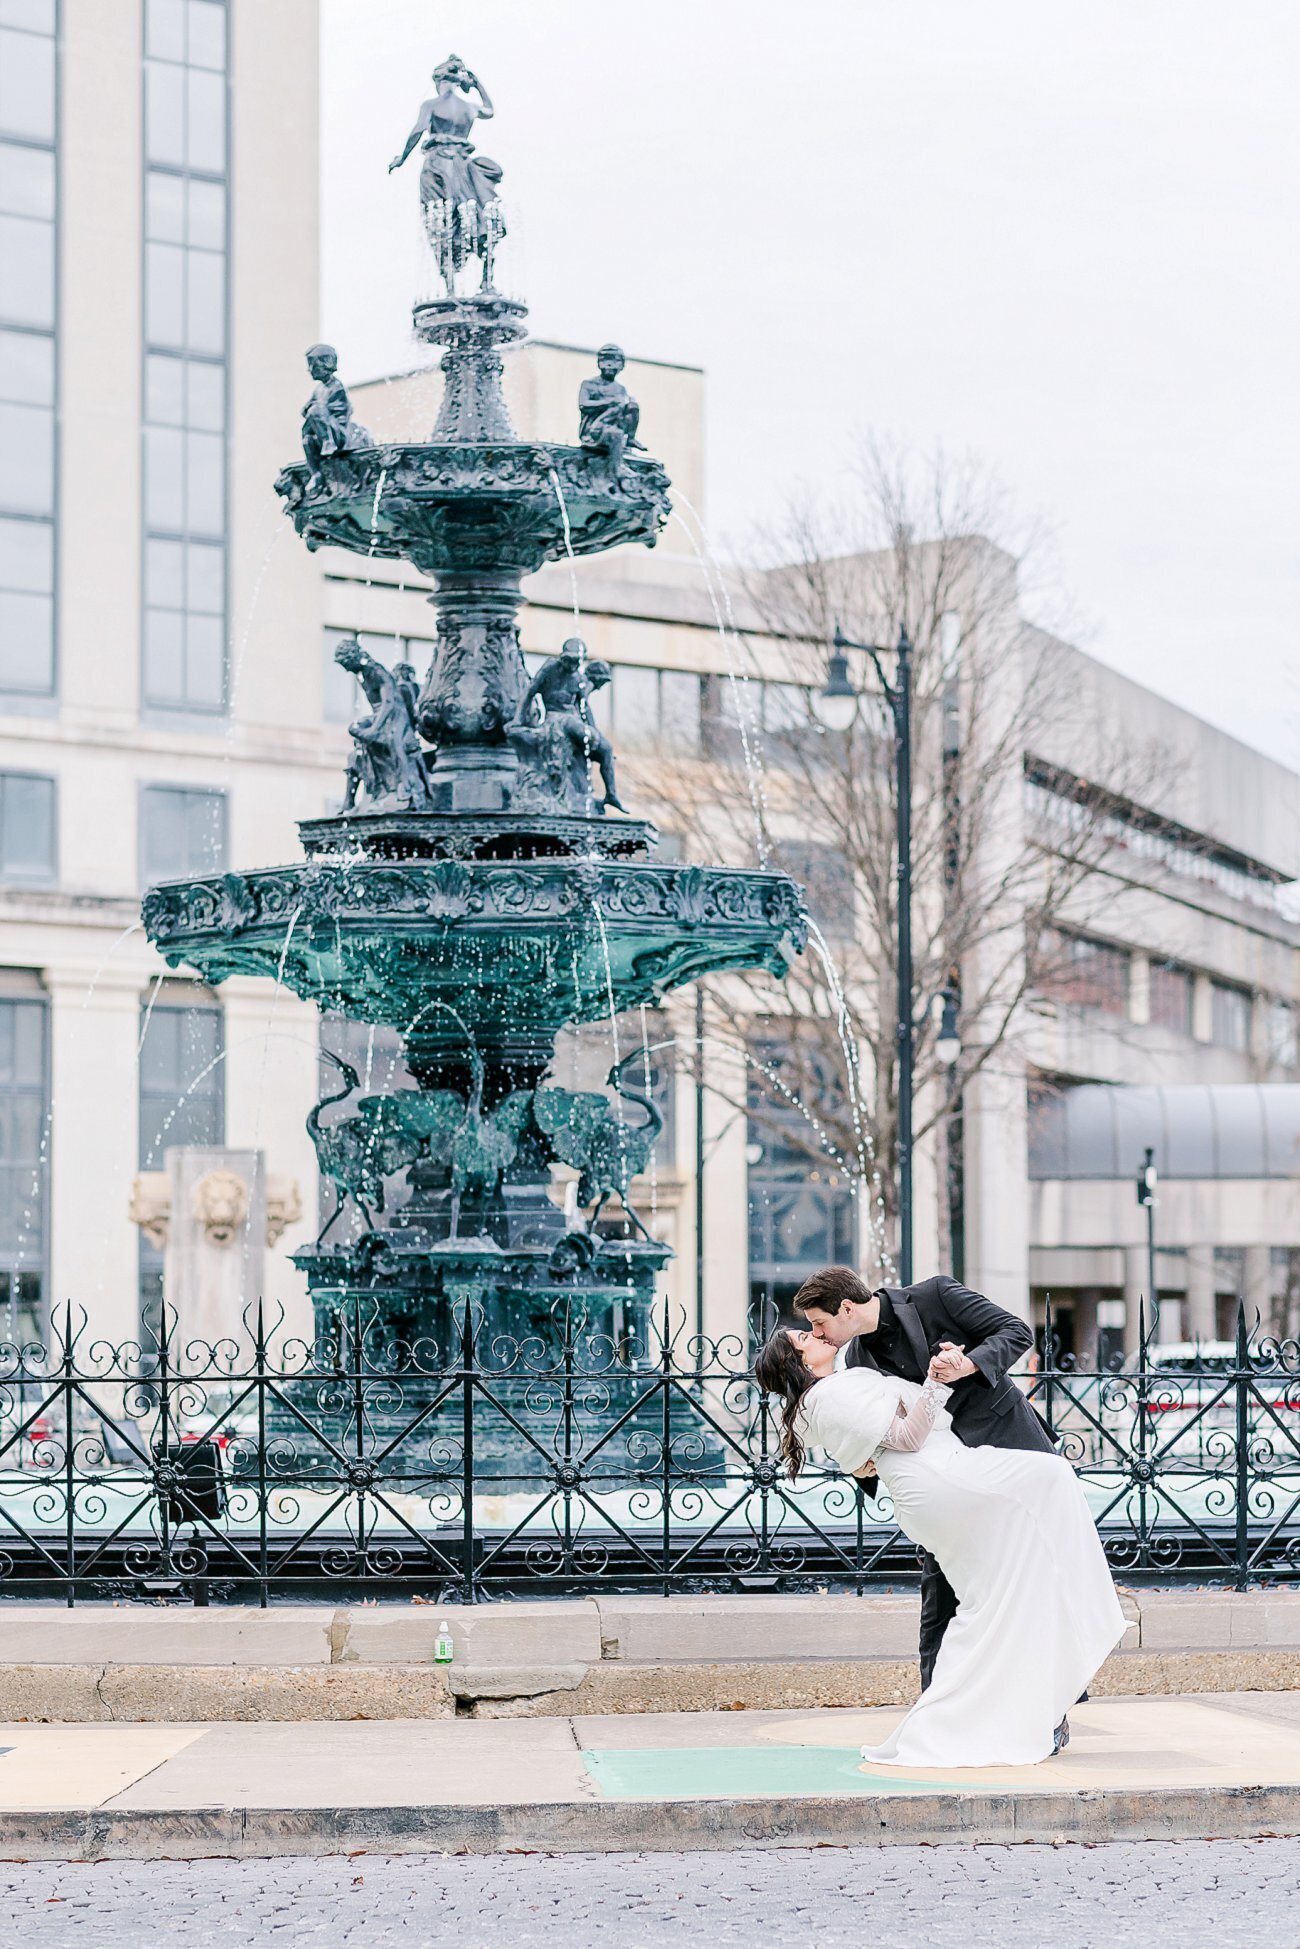 Bride and Groom kissing in front of Fountain | Wedding Photographer Amanda Horne